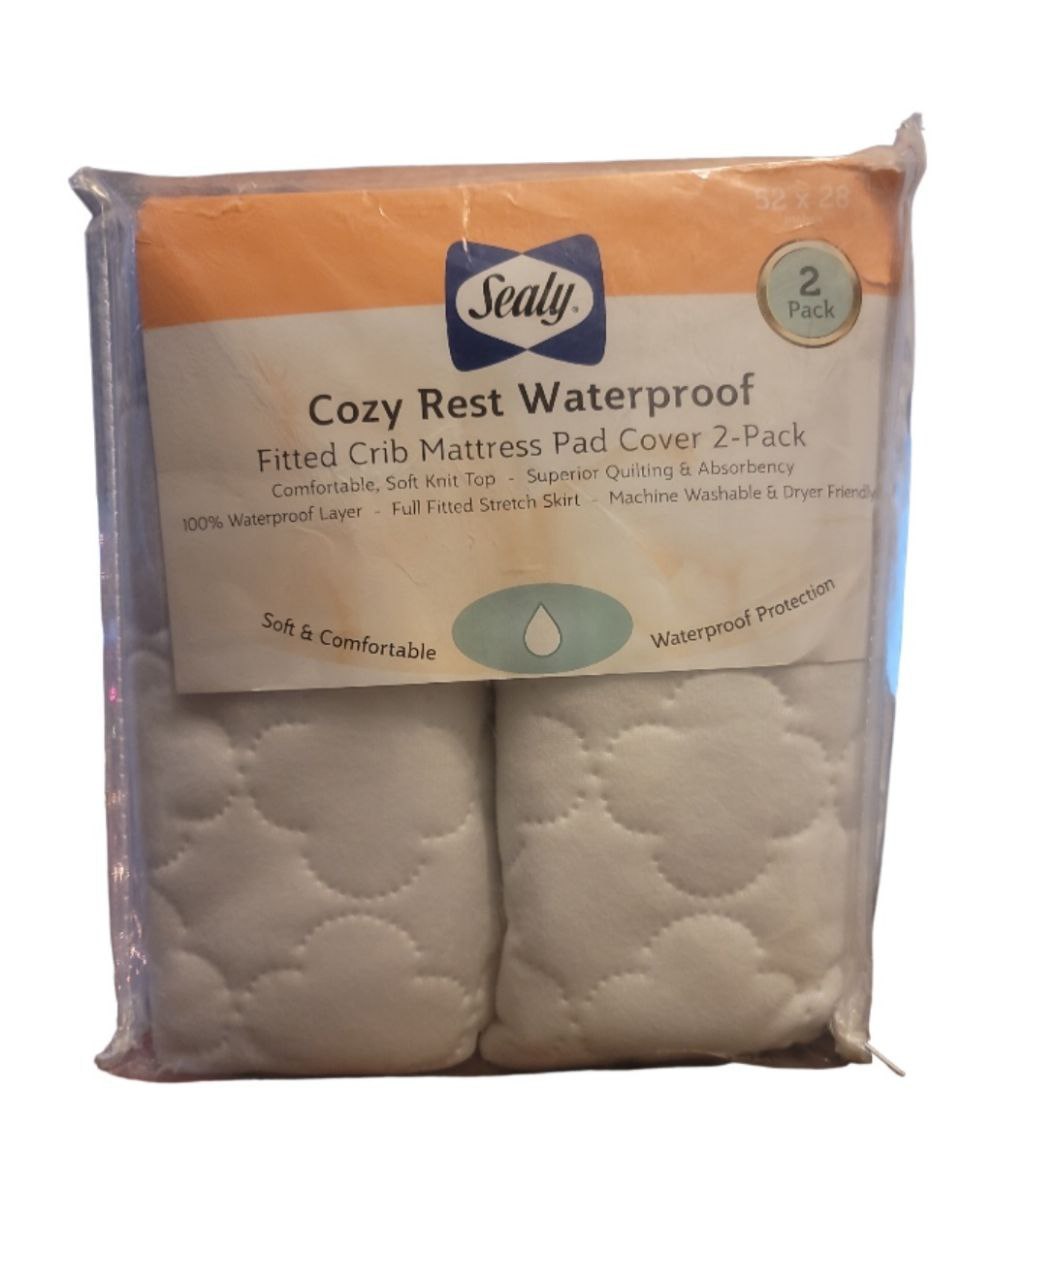 Sealy Cozy Rest Waterproof Fitted Crib Mattress Pad Cover 2 pack 52 x 28 inch - $29.99